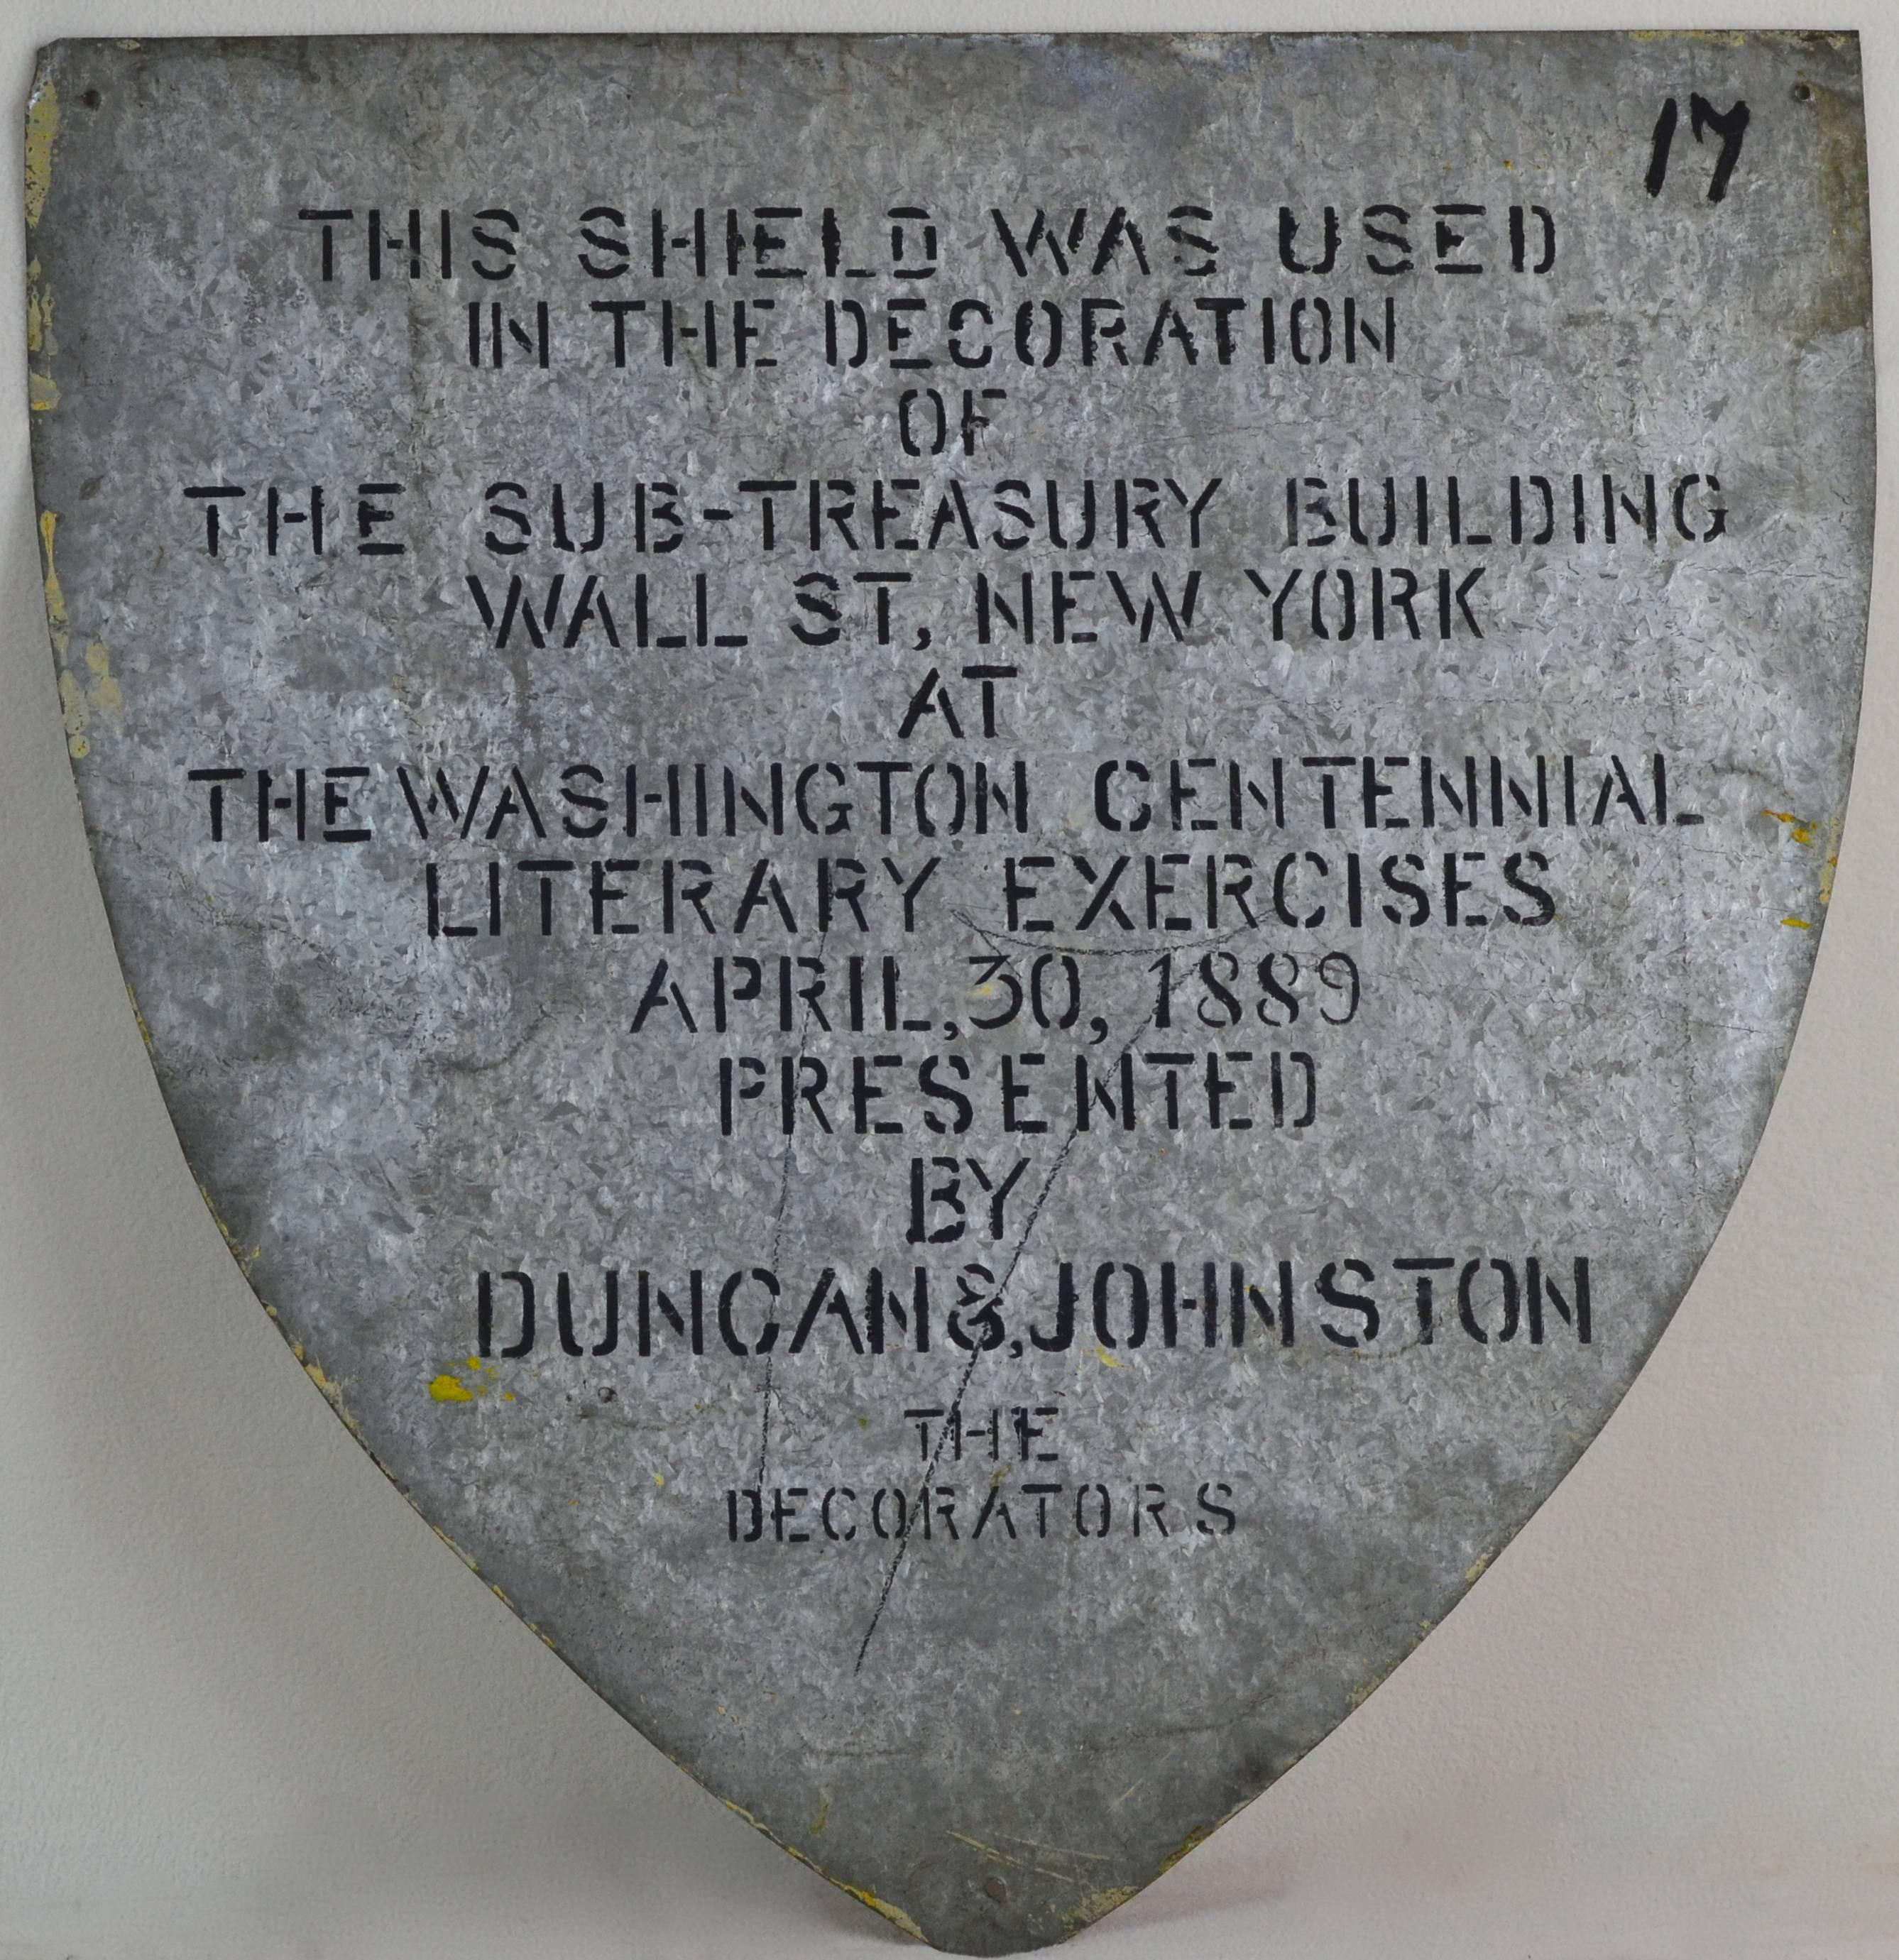 This is the original and one of a kind antique Federal shield panel that was hand-painted on tin of The OHIO State Seal.
It was hand made to decorate the Sub-Treasury Building on Wall Street in New York City for the Washington Centennial Literary